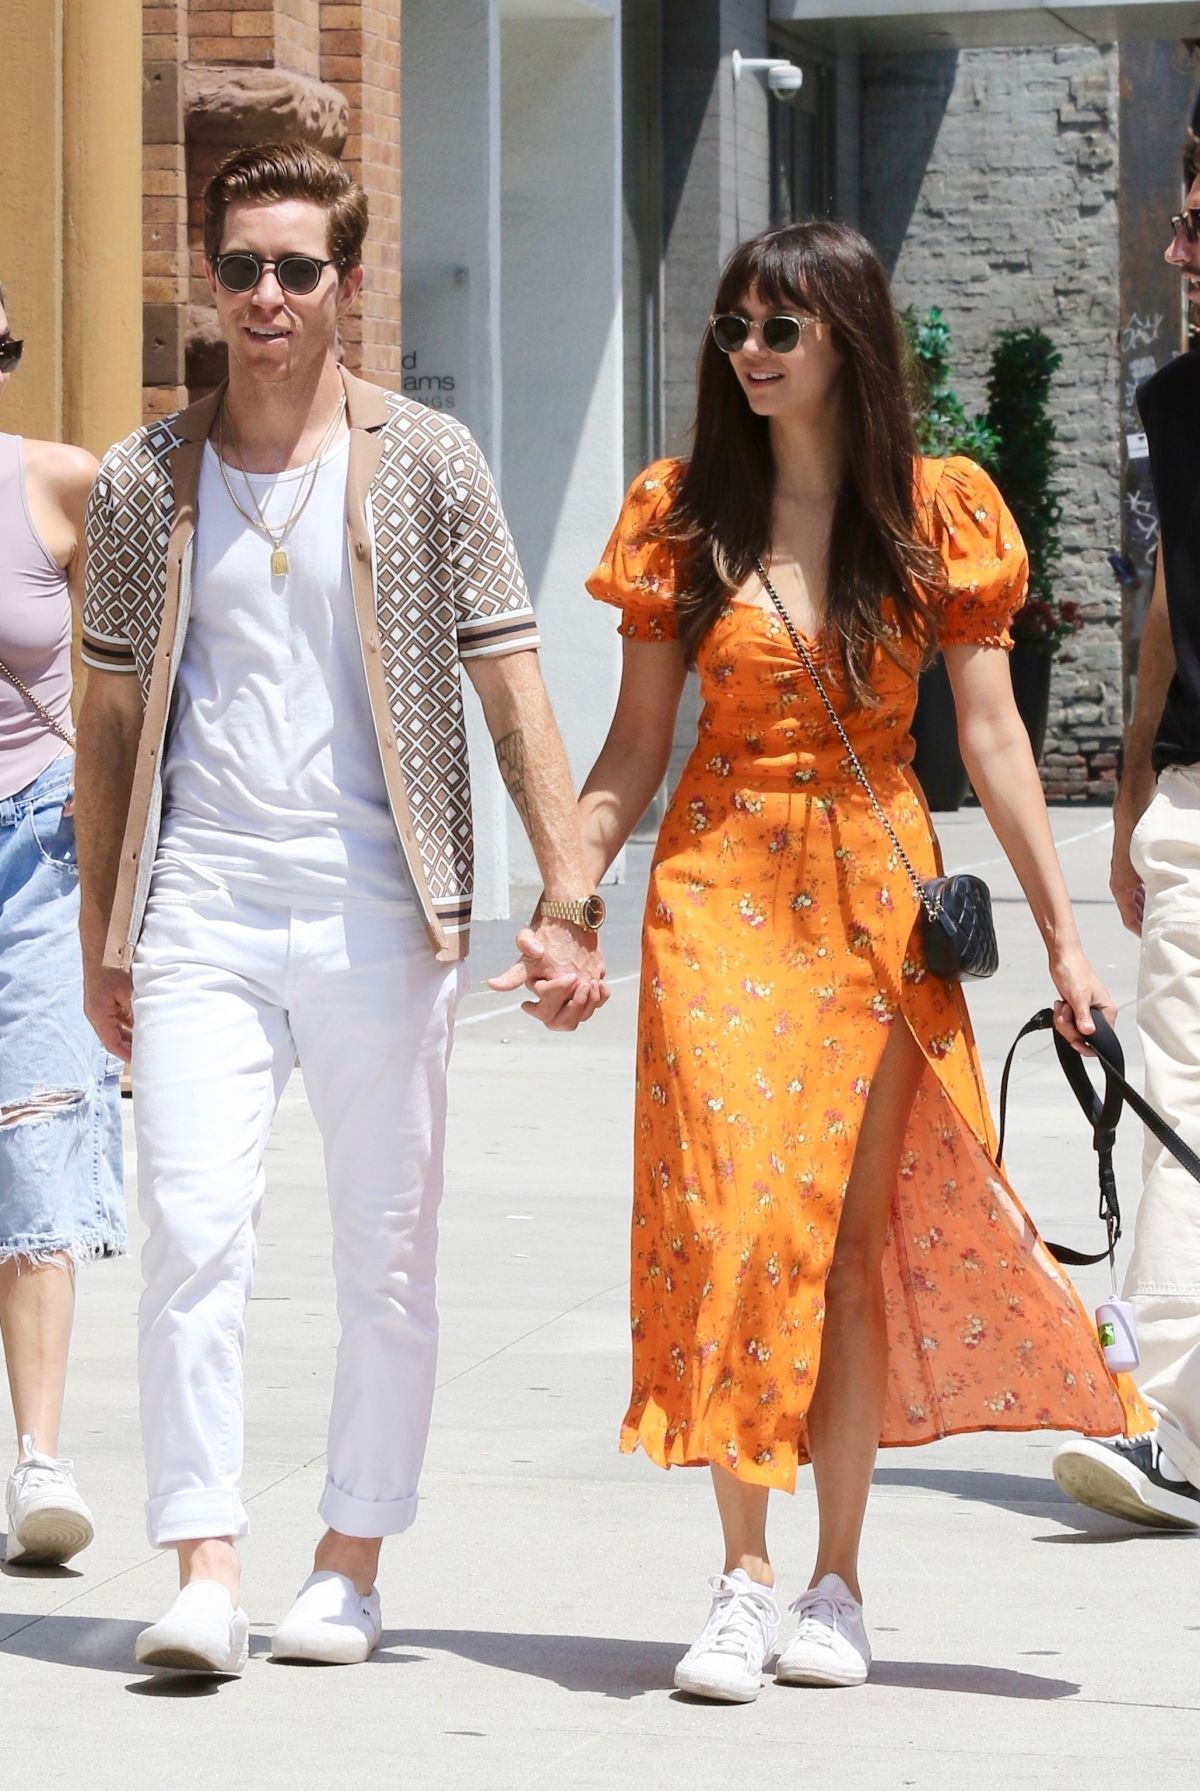 June 2023: Shaun White Accompanies Nina Dobrev to “The Out-Laws